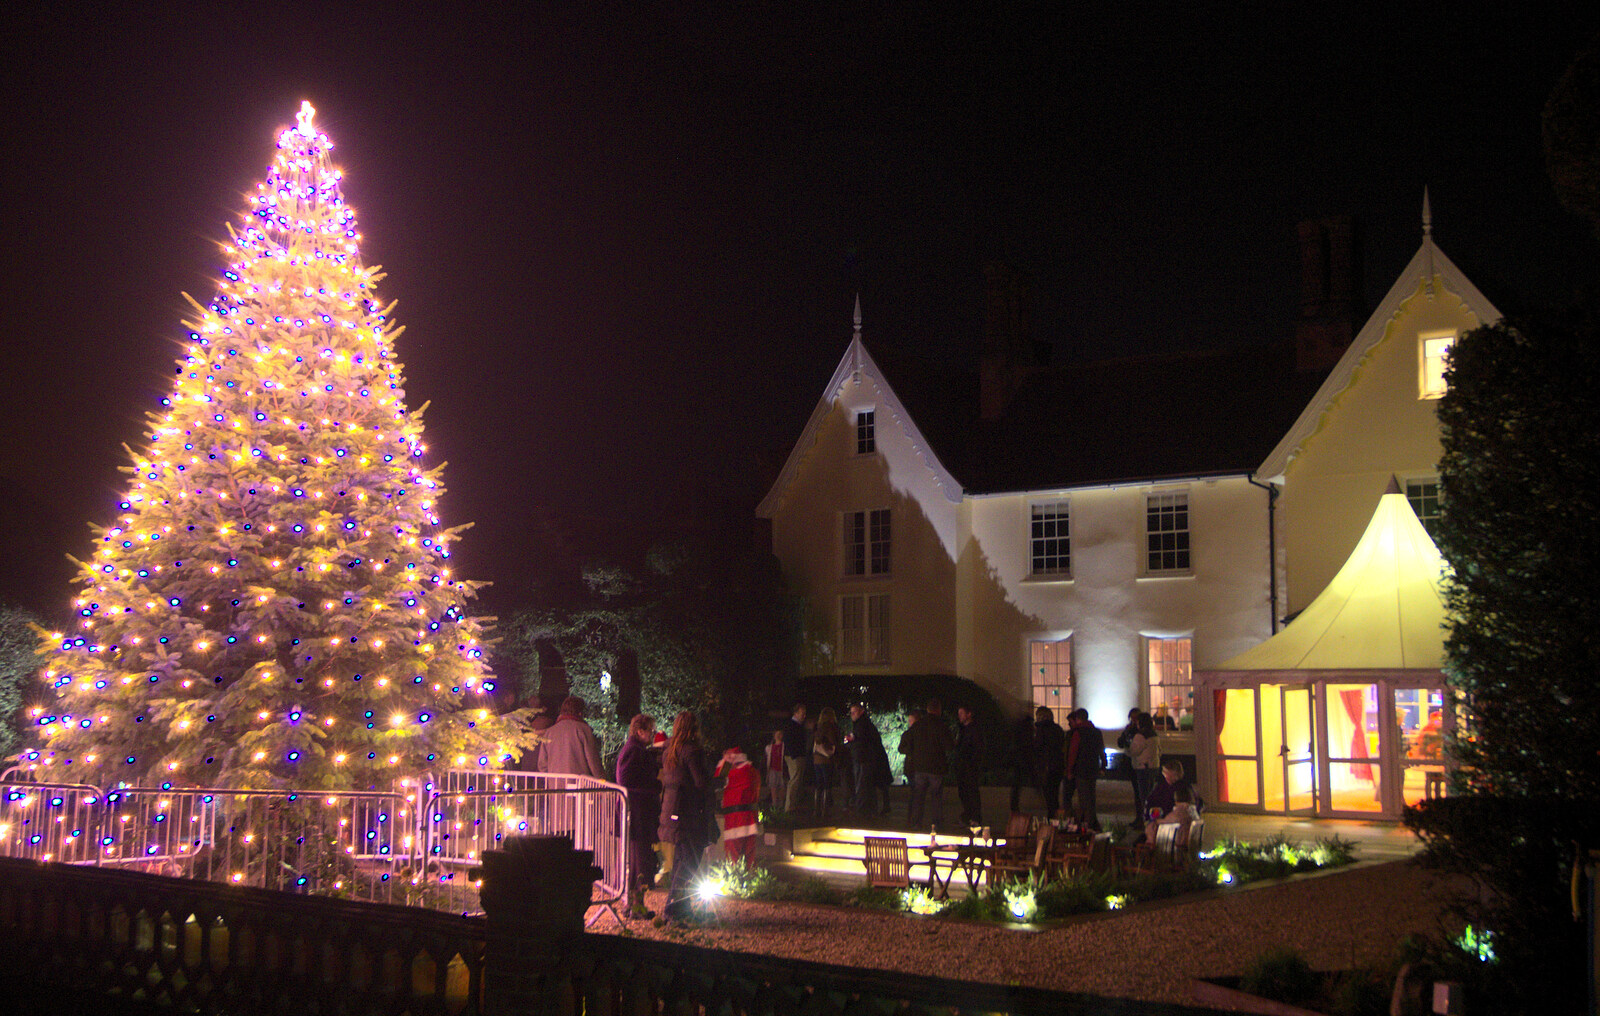 The Oaksmere and its tree from Rick Wakeman, Ian Lavender and the Christmas lights, The Oaksmere, Suffolk - 4th December 2014